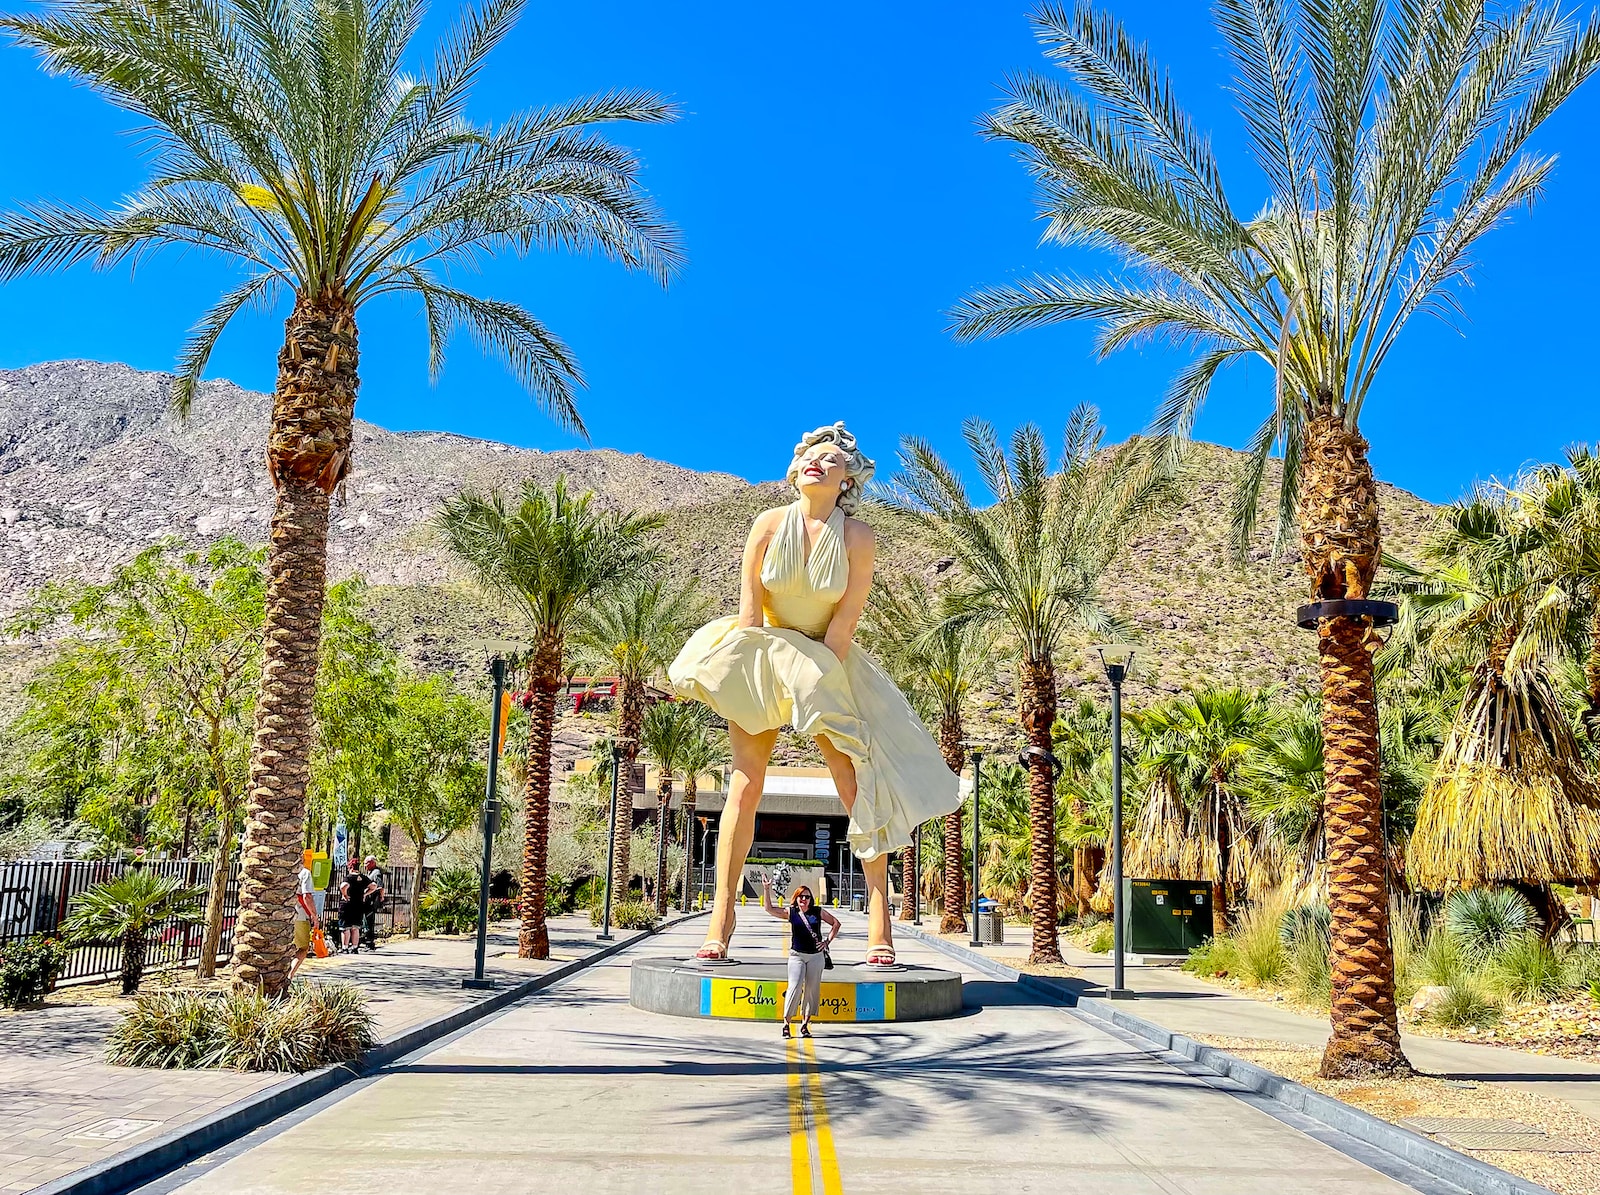 a statue of a person in a dress surrounded by palm trees